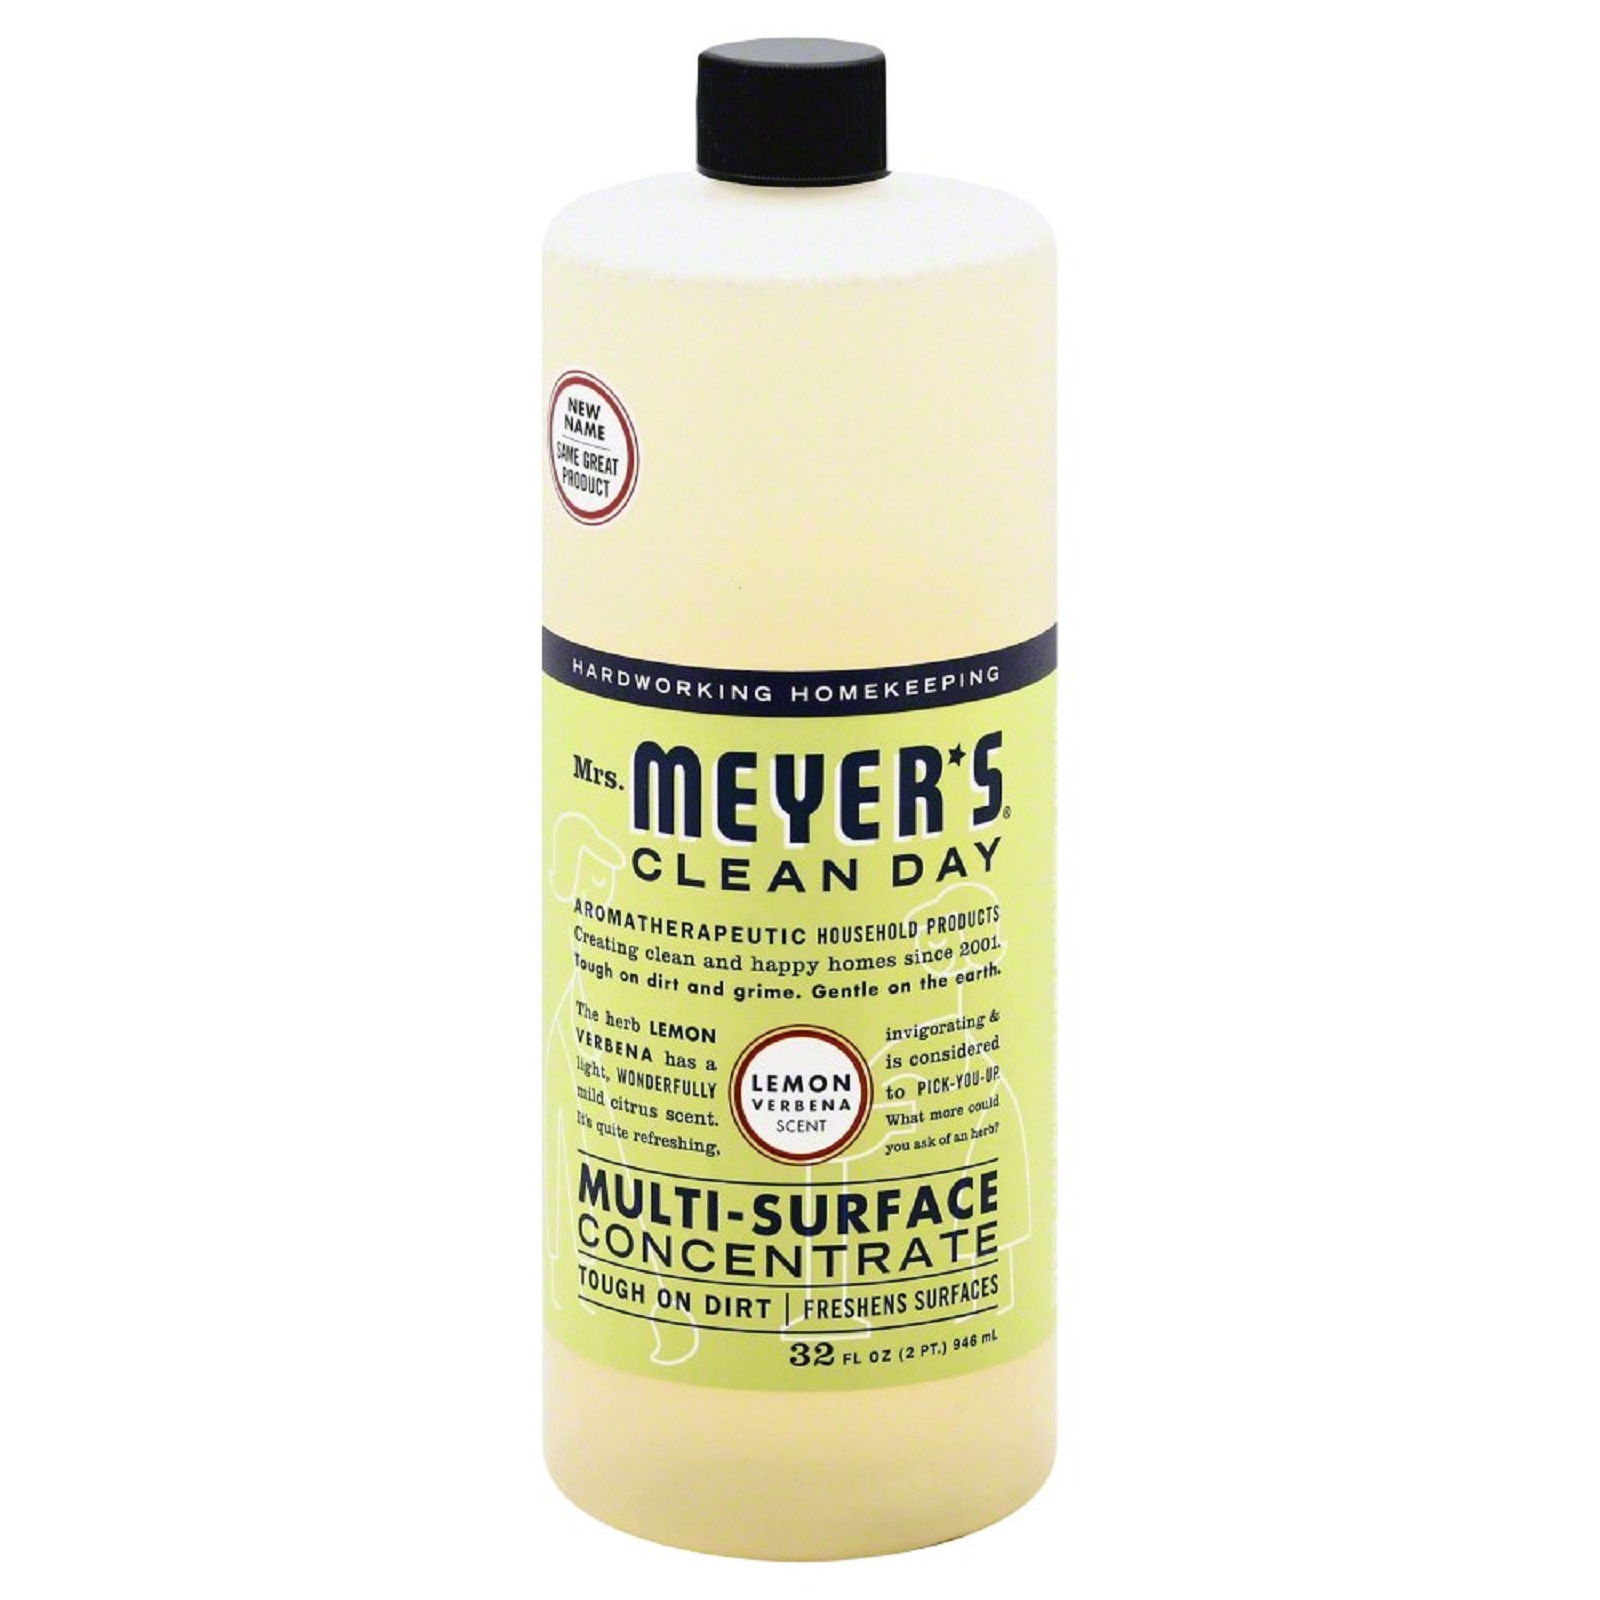 Mrs. Meyers Clean Day Lemon Verbena Multi-Surface Concentrate 32oz ...